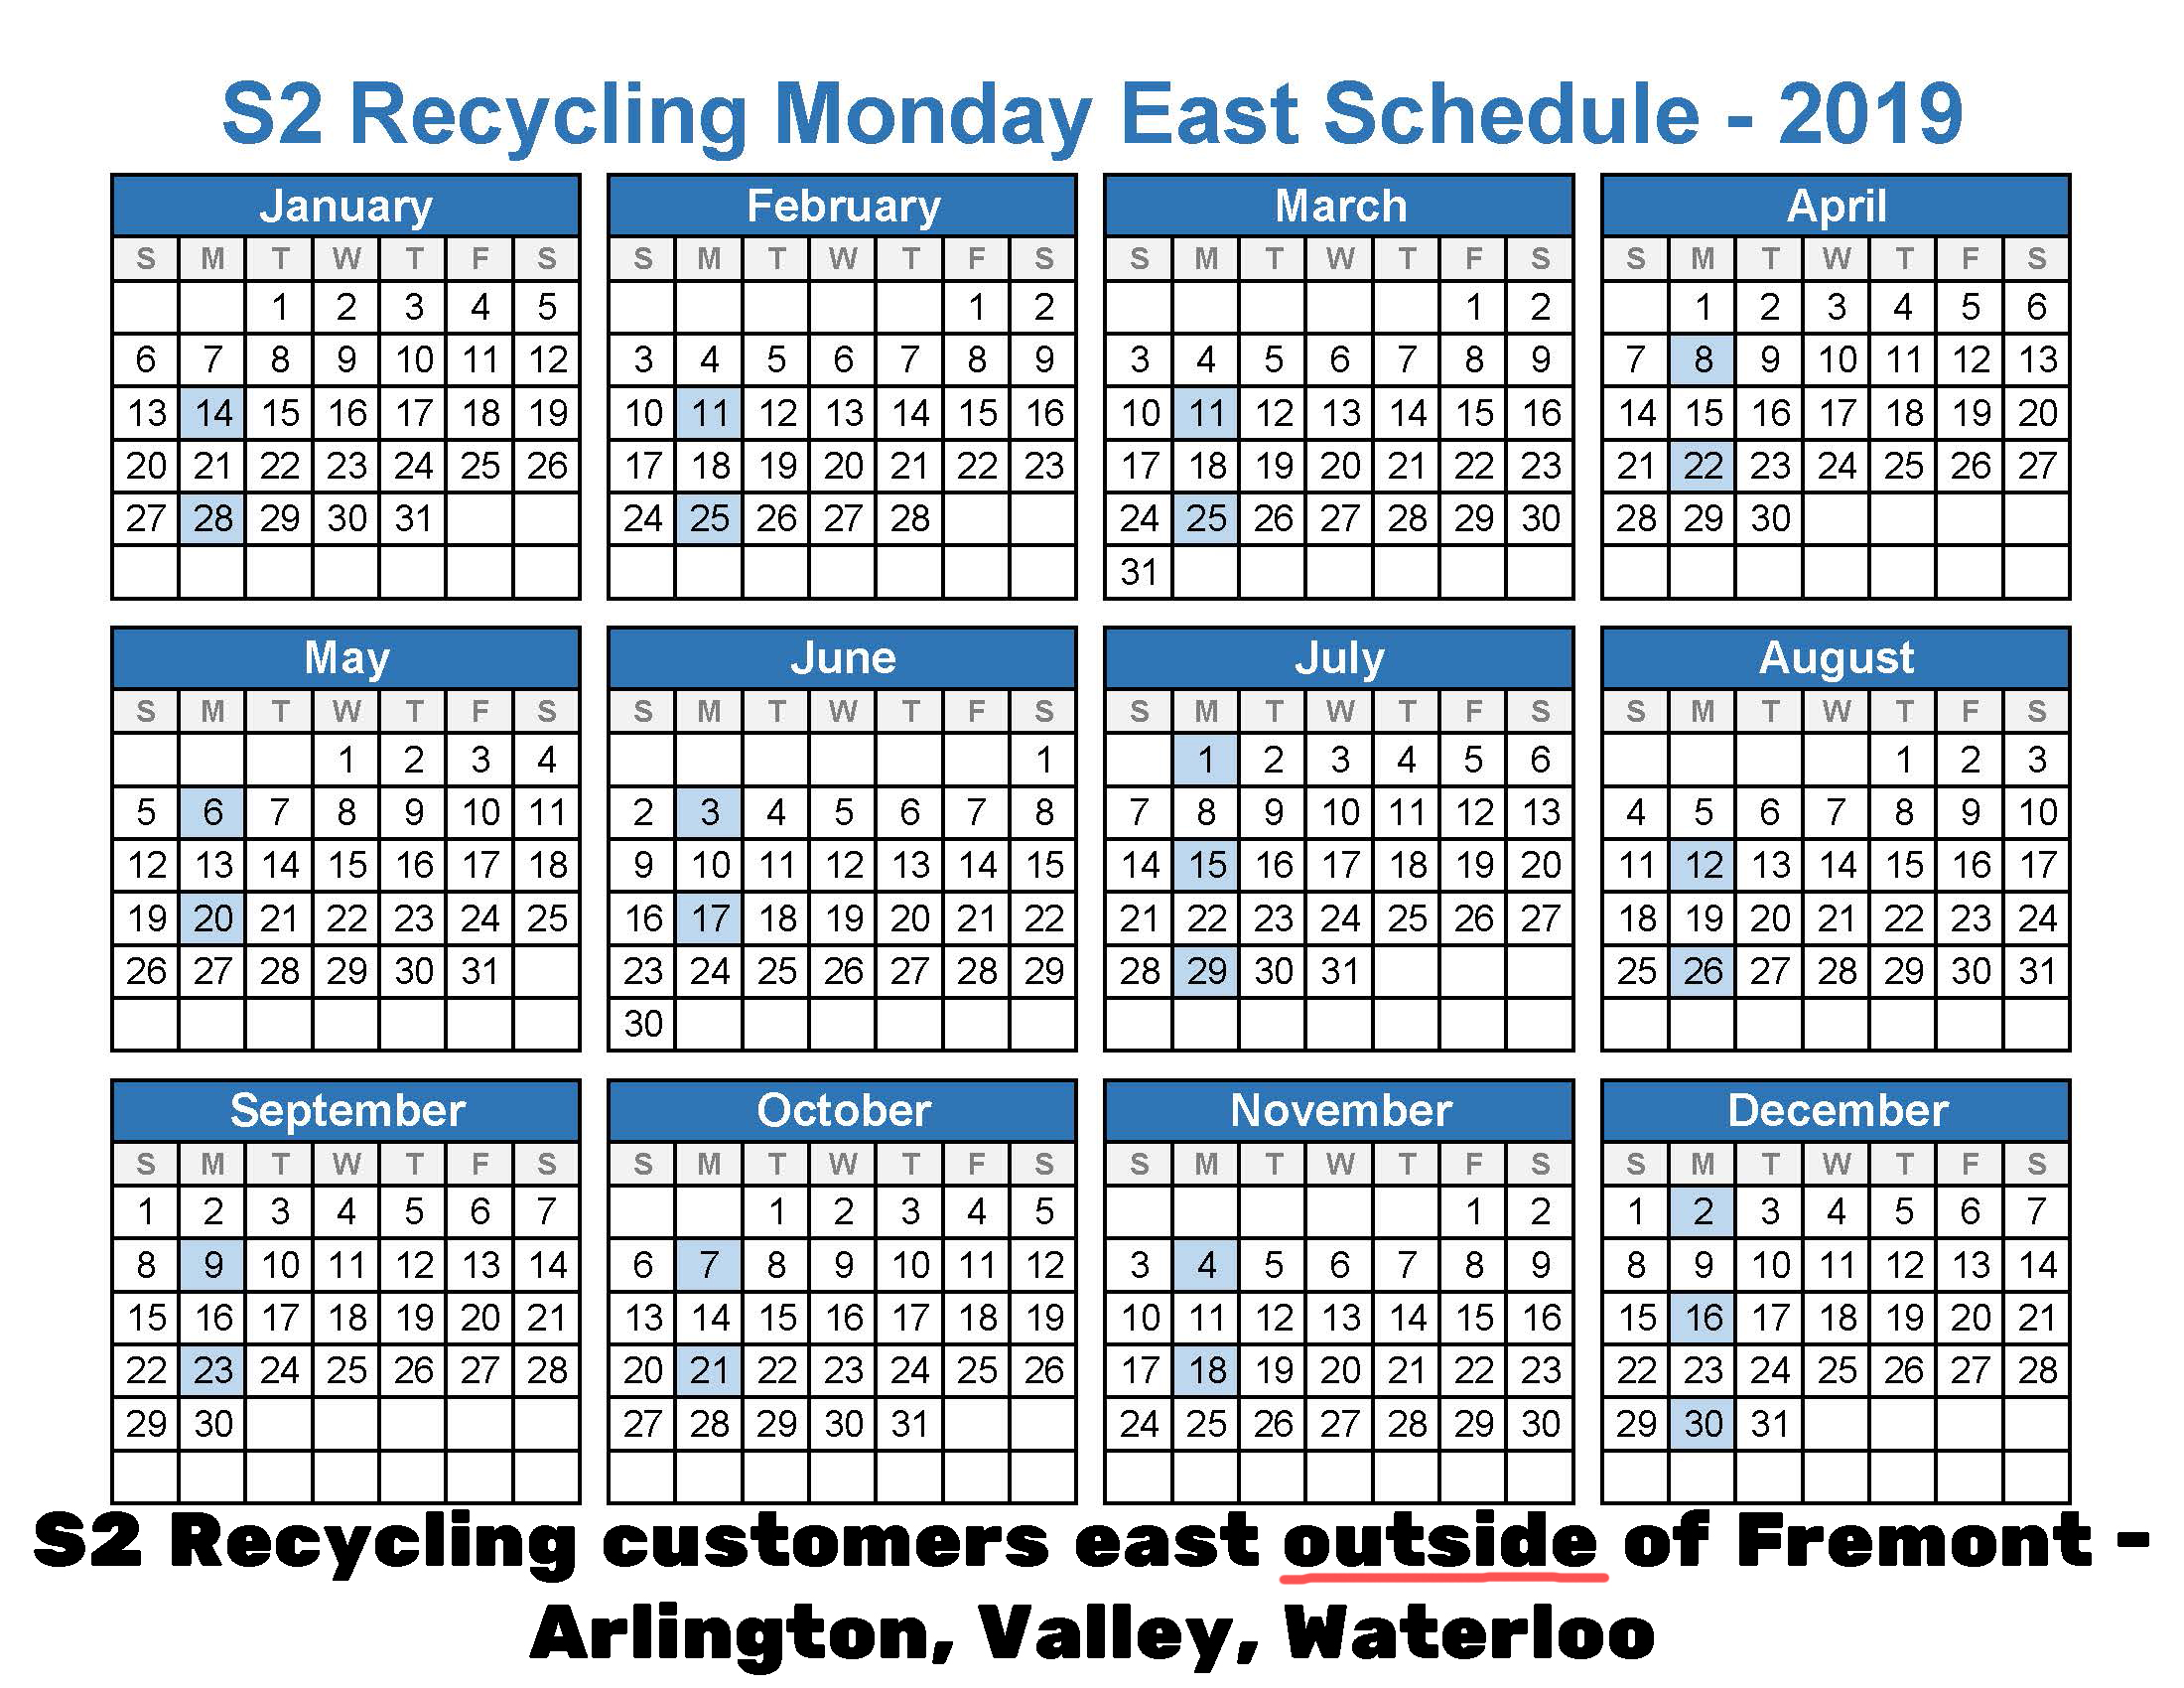 2019 Recycling Monday East schedule